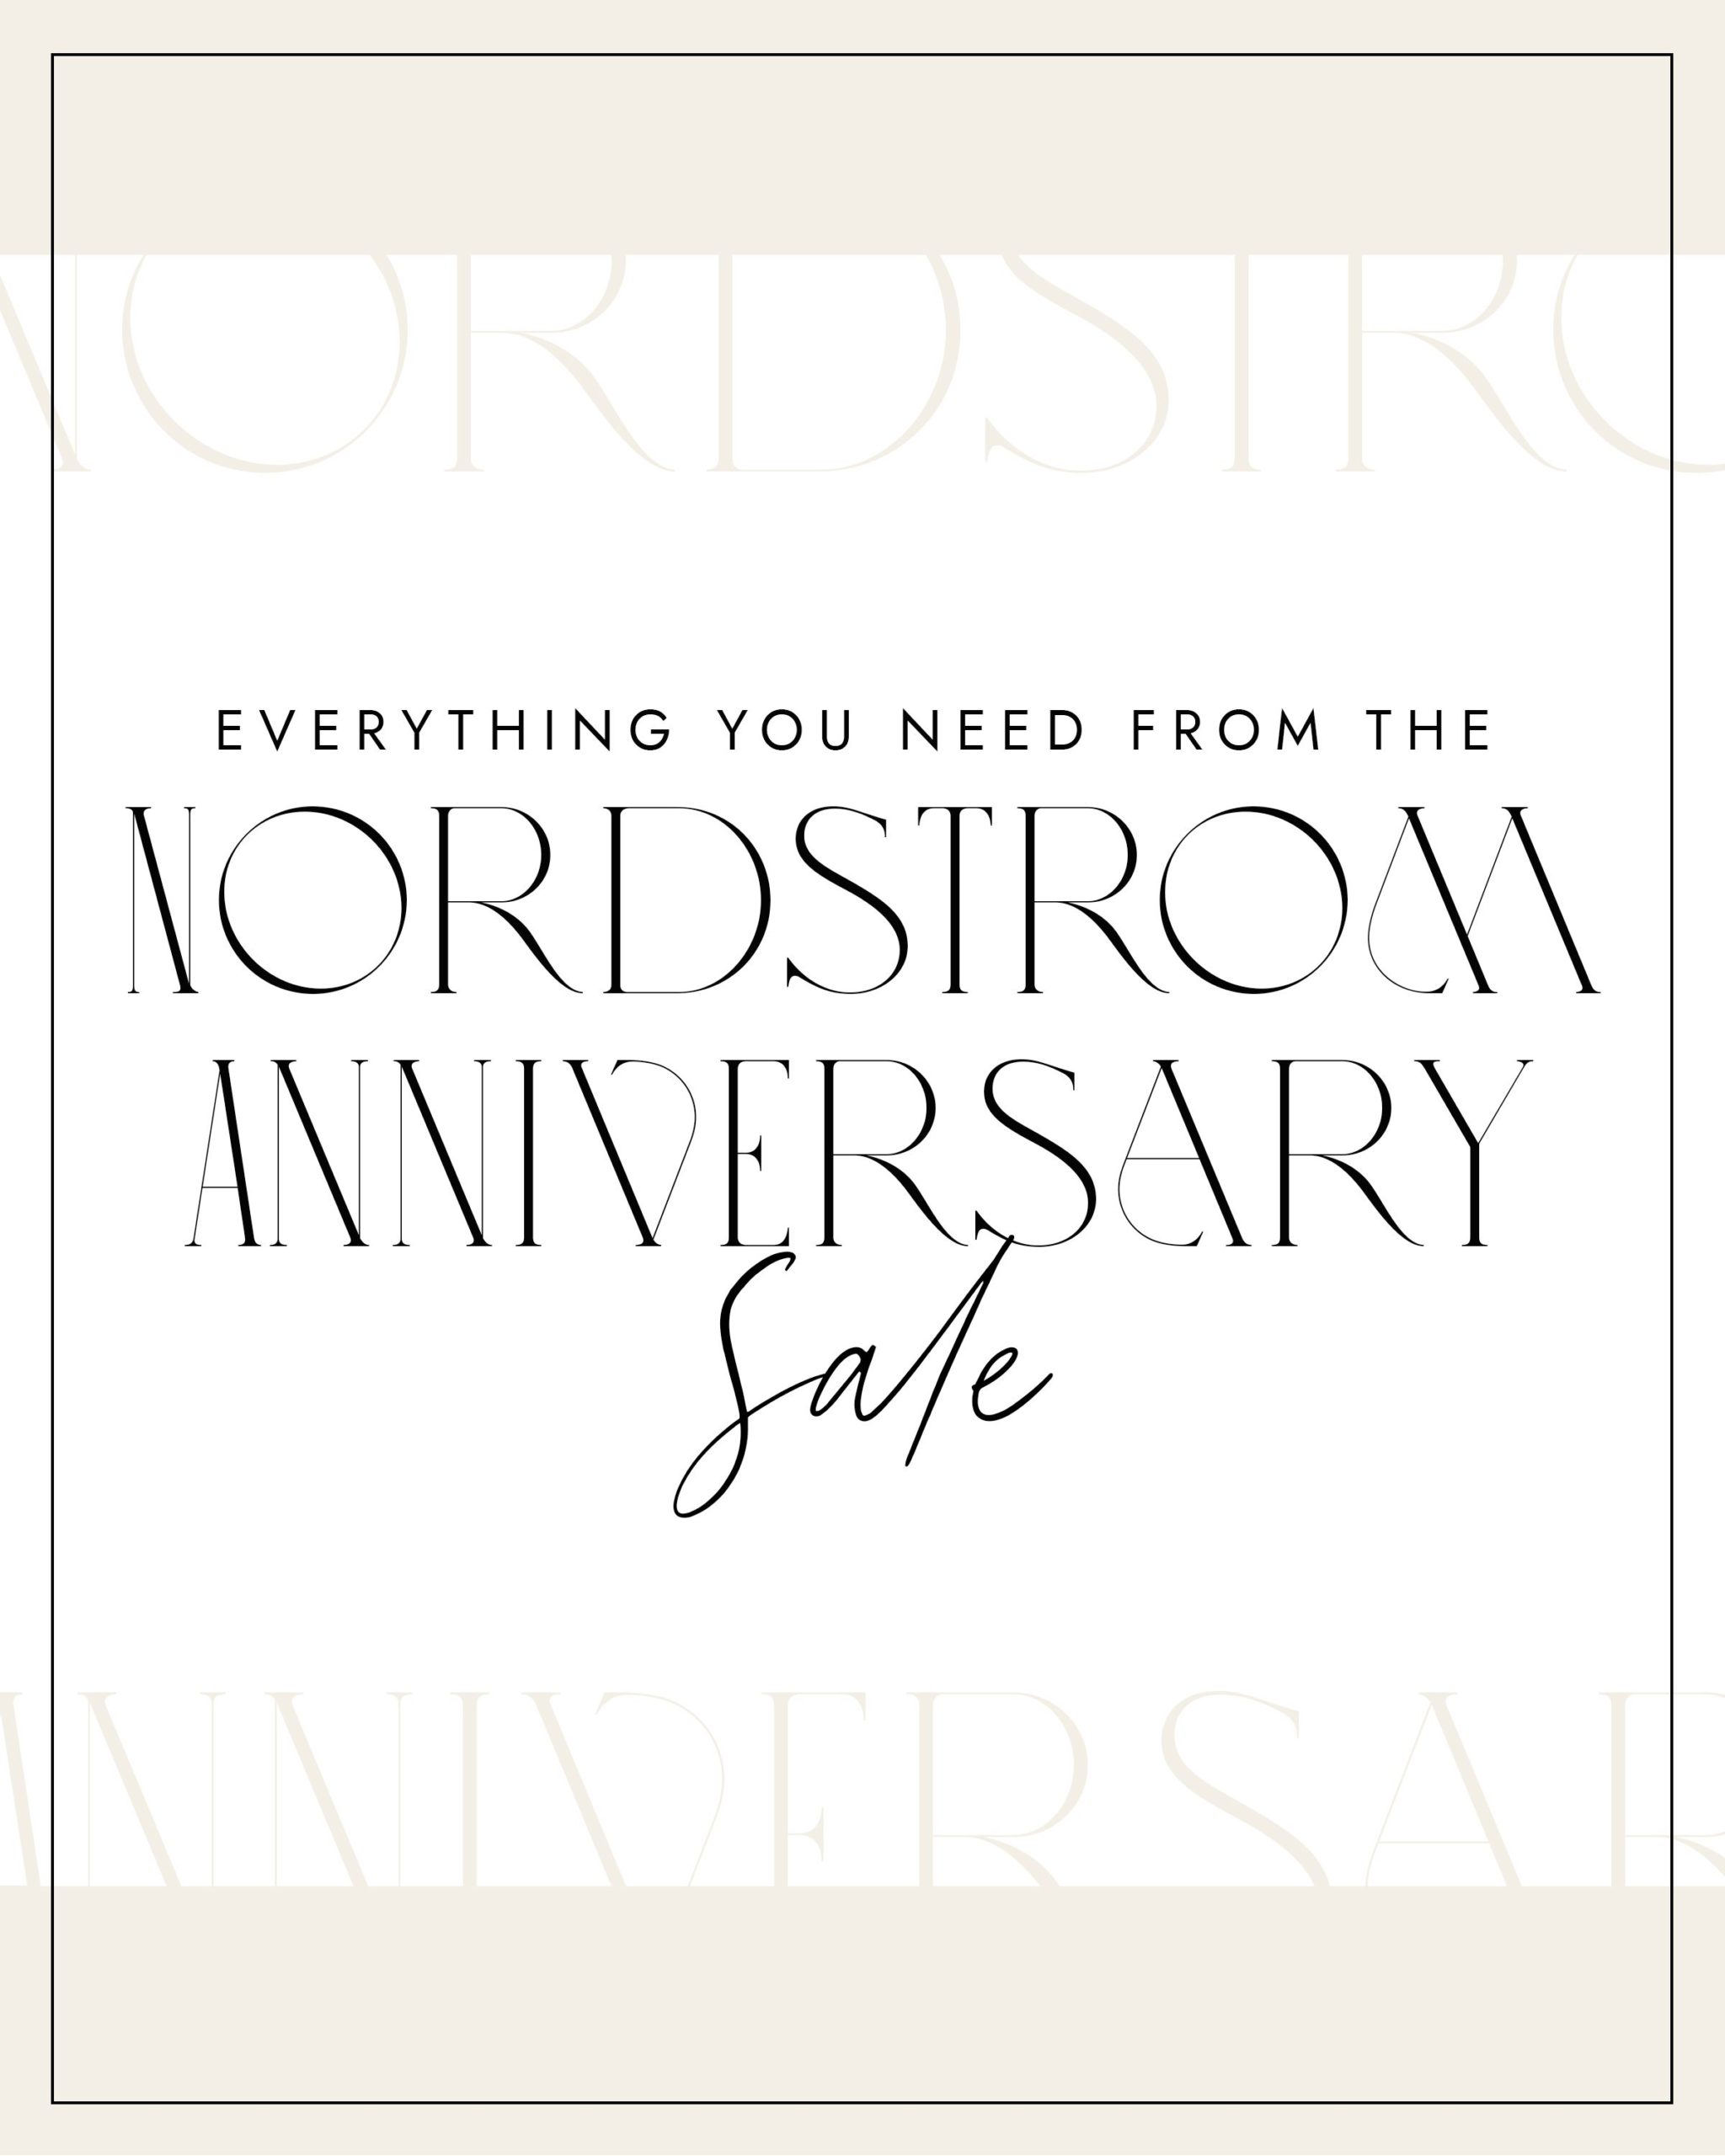 Nordstrom Anniversary Sale 2022: Everything You Need to Know